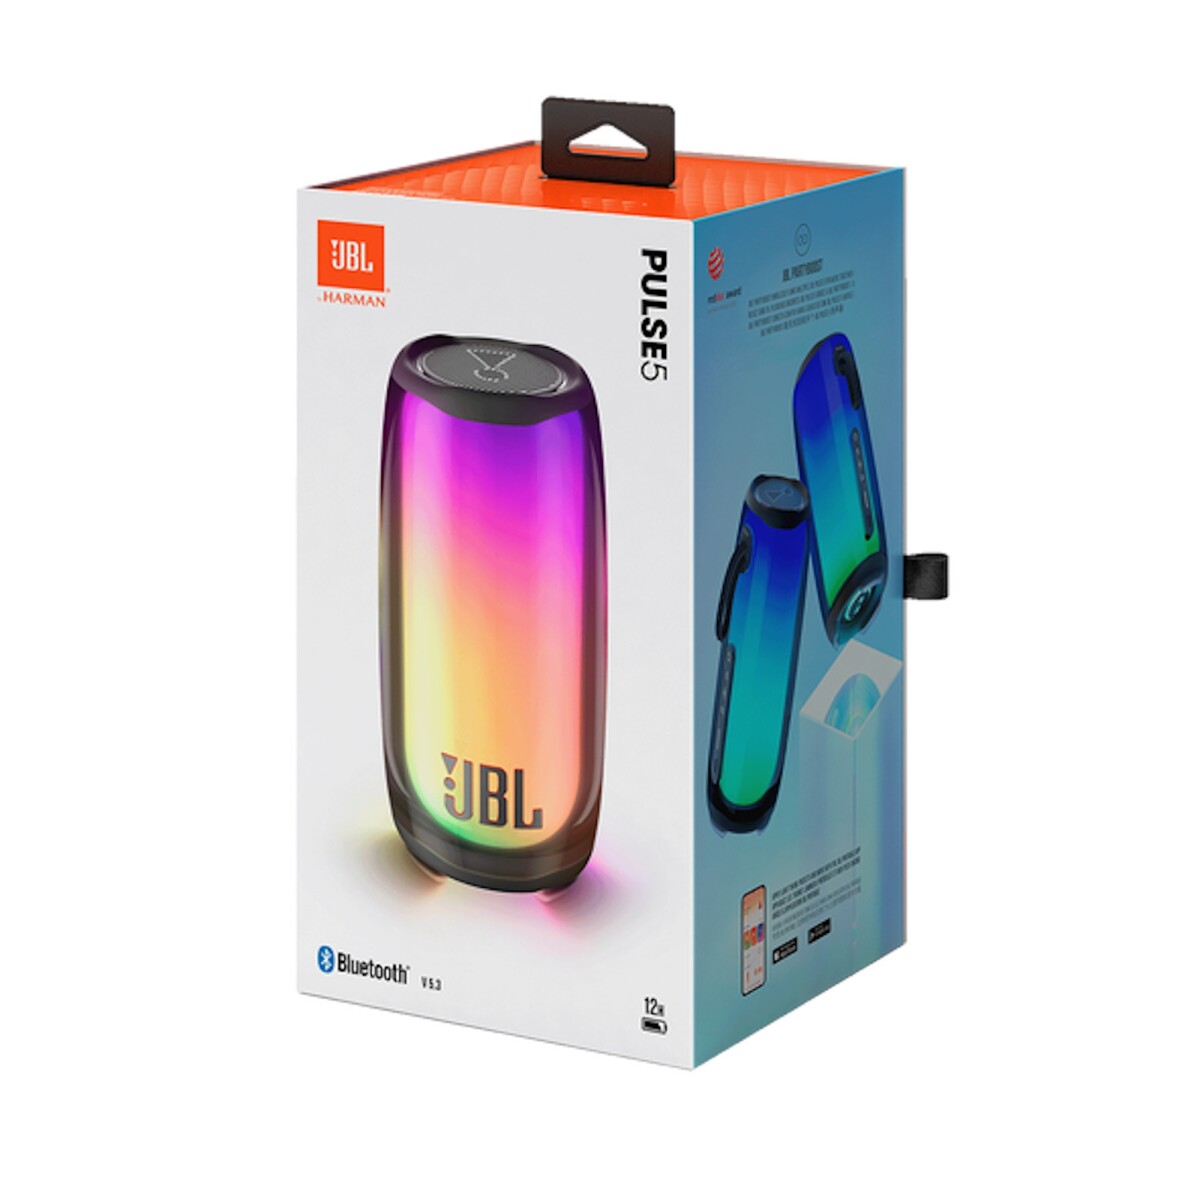 Jbl - Parlante Inalámbrico Charge 5 - IP67. Bluetooth. 30W. - 001 